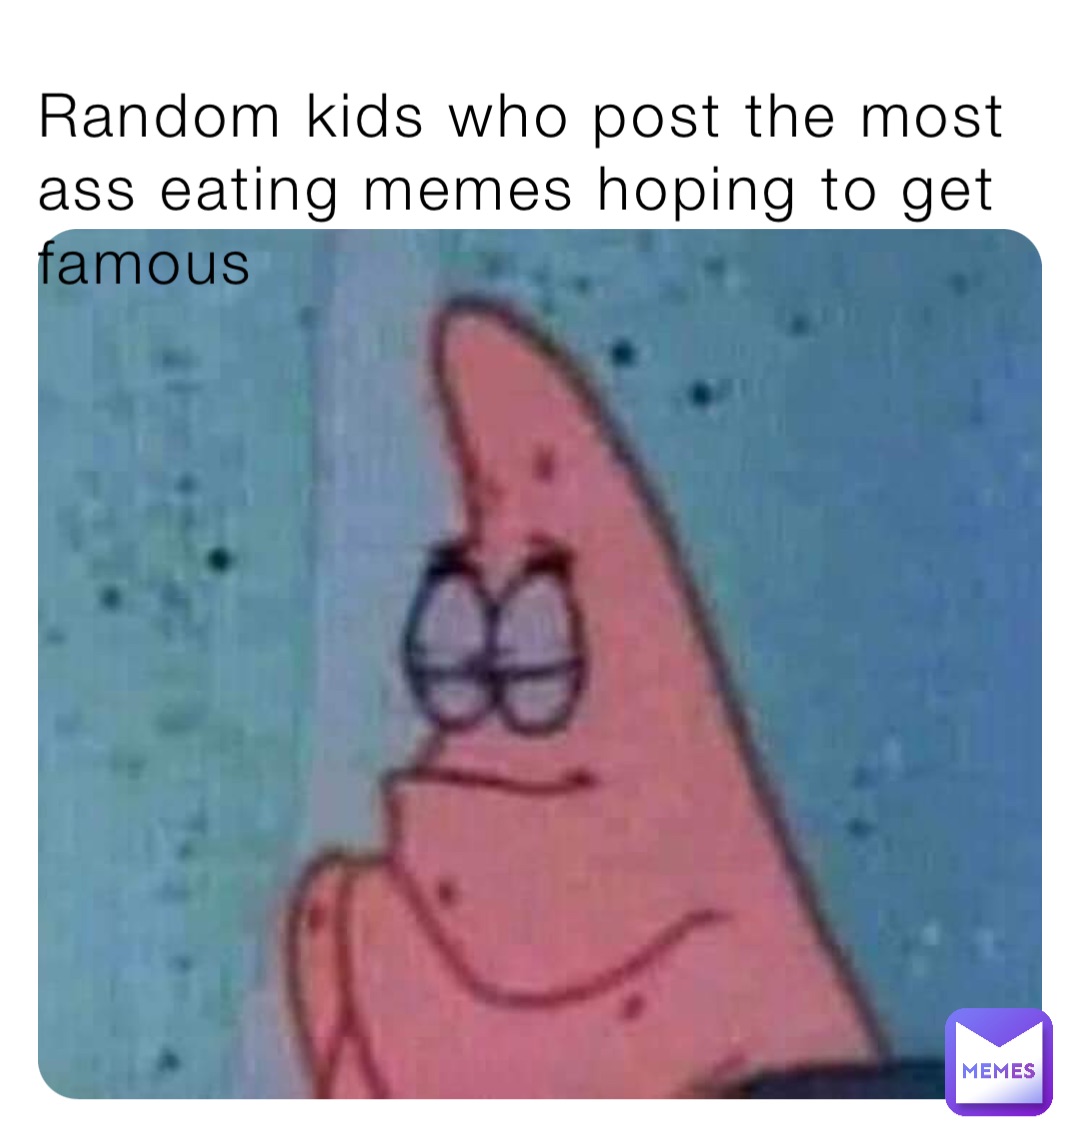 Random kids who post the most ass eating memes hoping to get famous